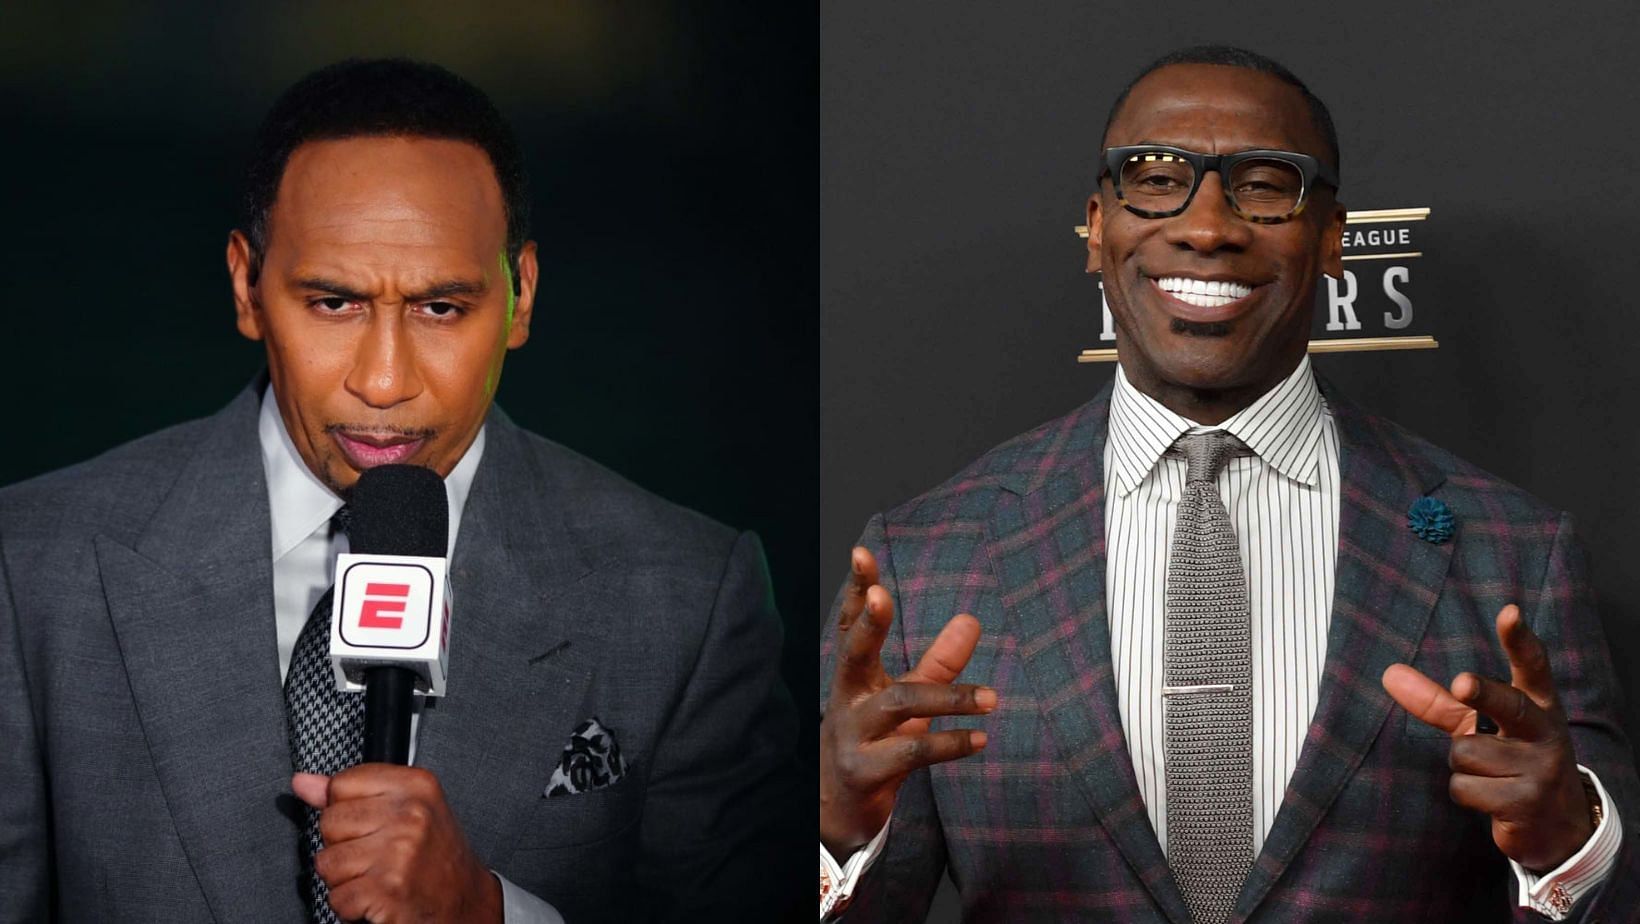 Could we see Shannon Sharpe and Stephen A. Smith on the same show?